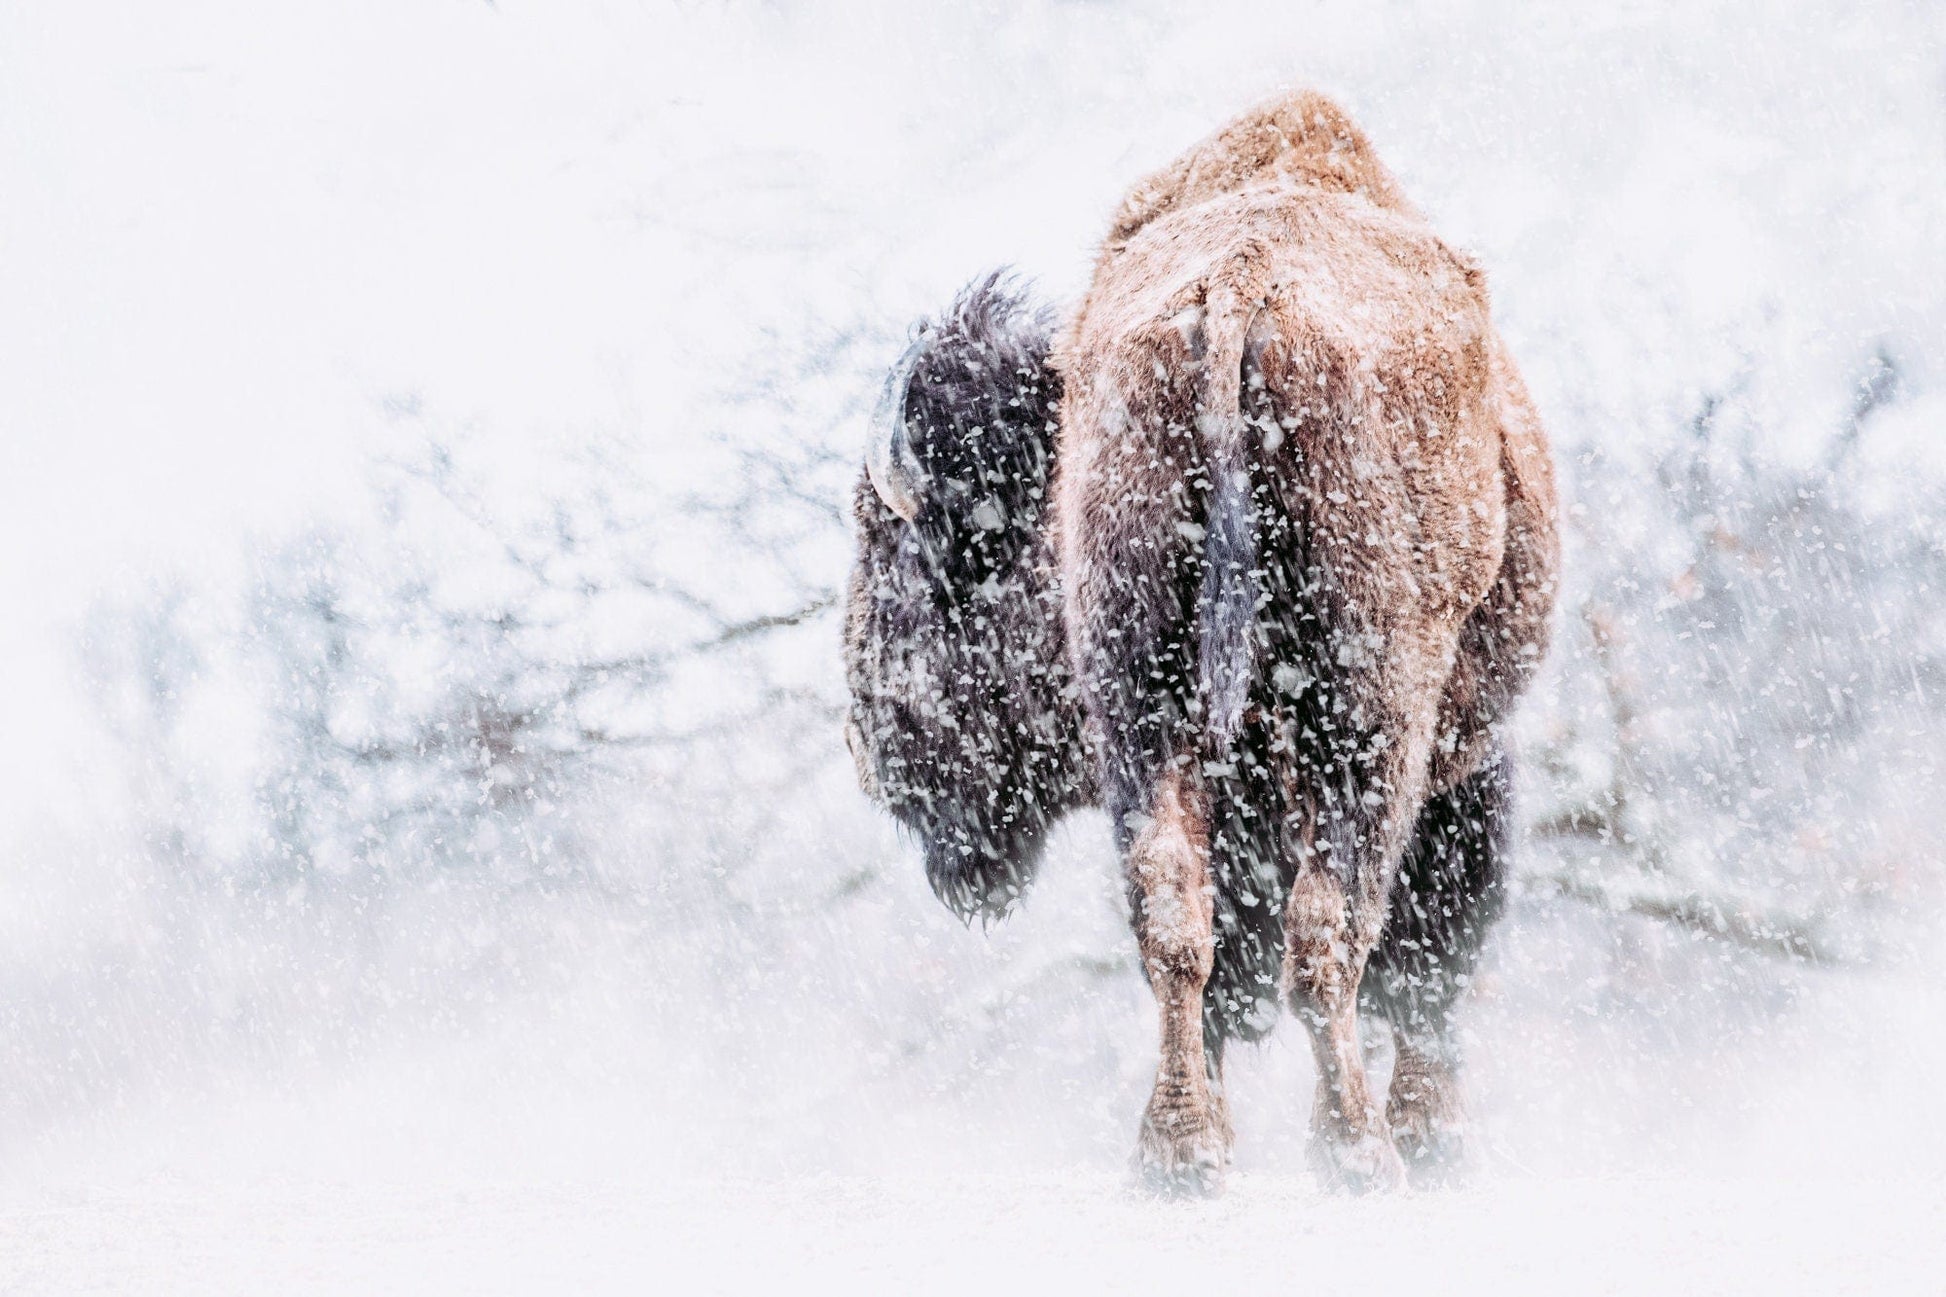 Teri James Photography Wall Art Paper Photo Print / 12 x 18 Inches Bison in a Blizzard - Buffalo Snow Storm